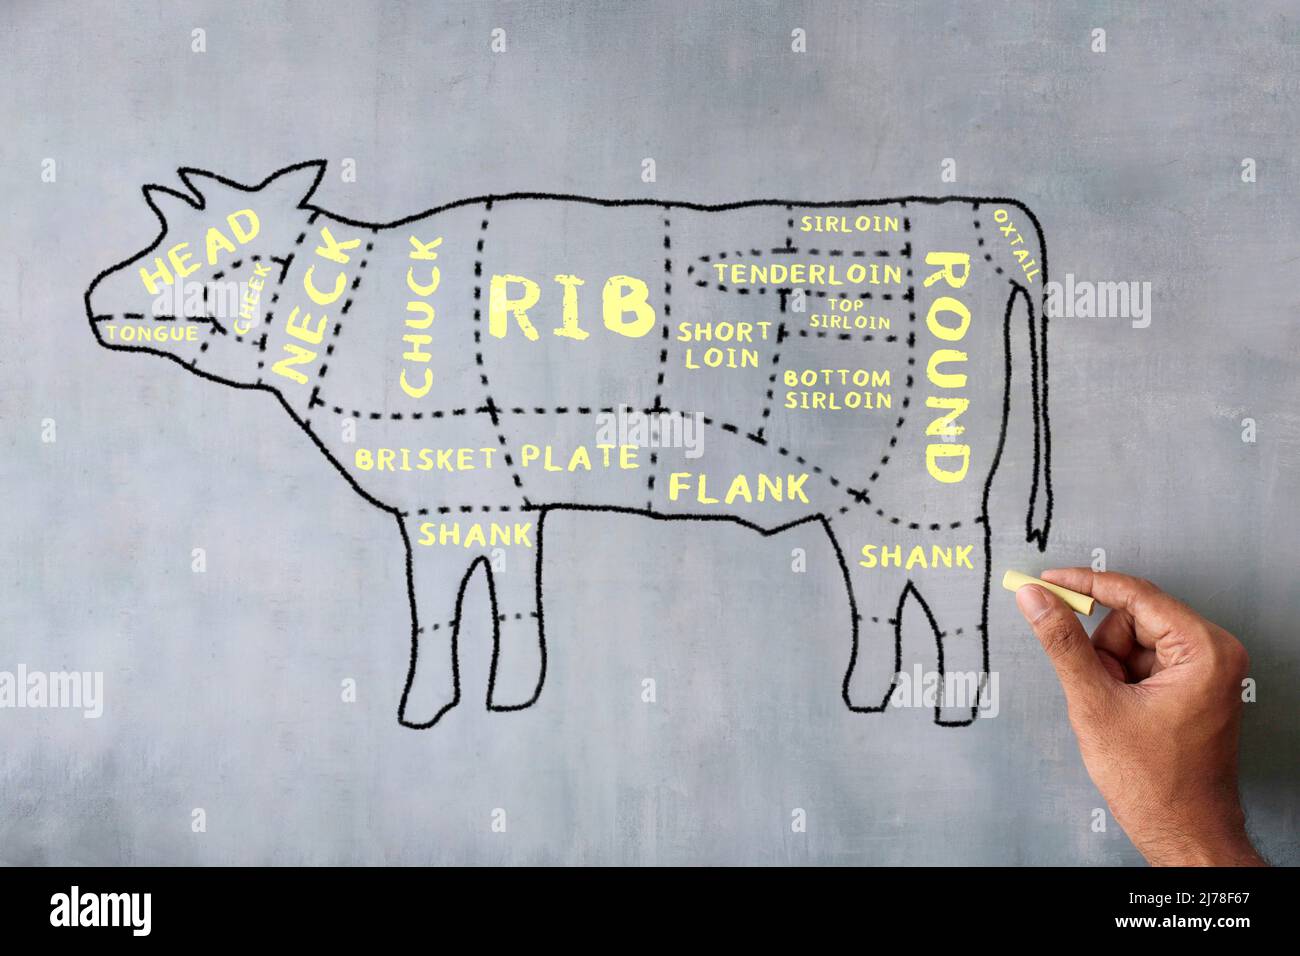 Hand drawn image of butcher beef cuts diagram on chalkboard. Stock Photo